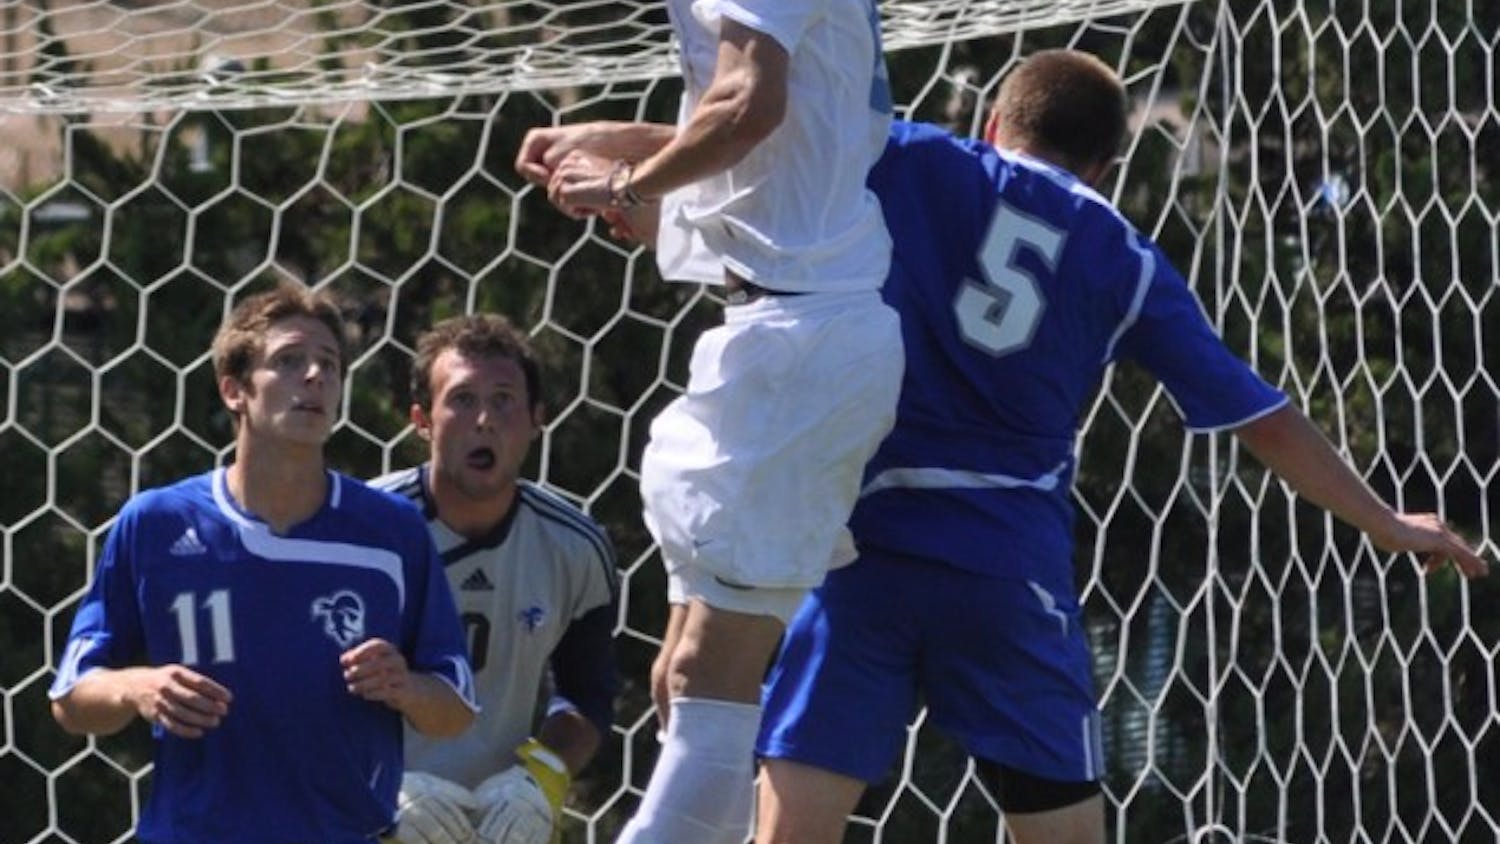 Stephen McCarthy goes up for a header against Seton Hall on Sunday. McCarthy scored UNC’s third goal against the Pirates in a rebound win after Friday’s home loss to the No. 1 Akron Zips.